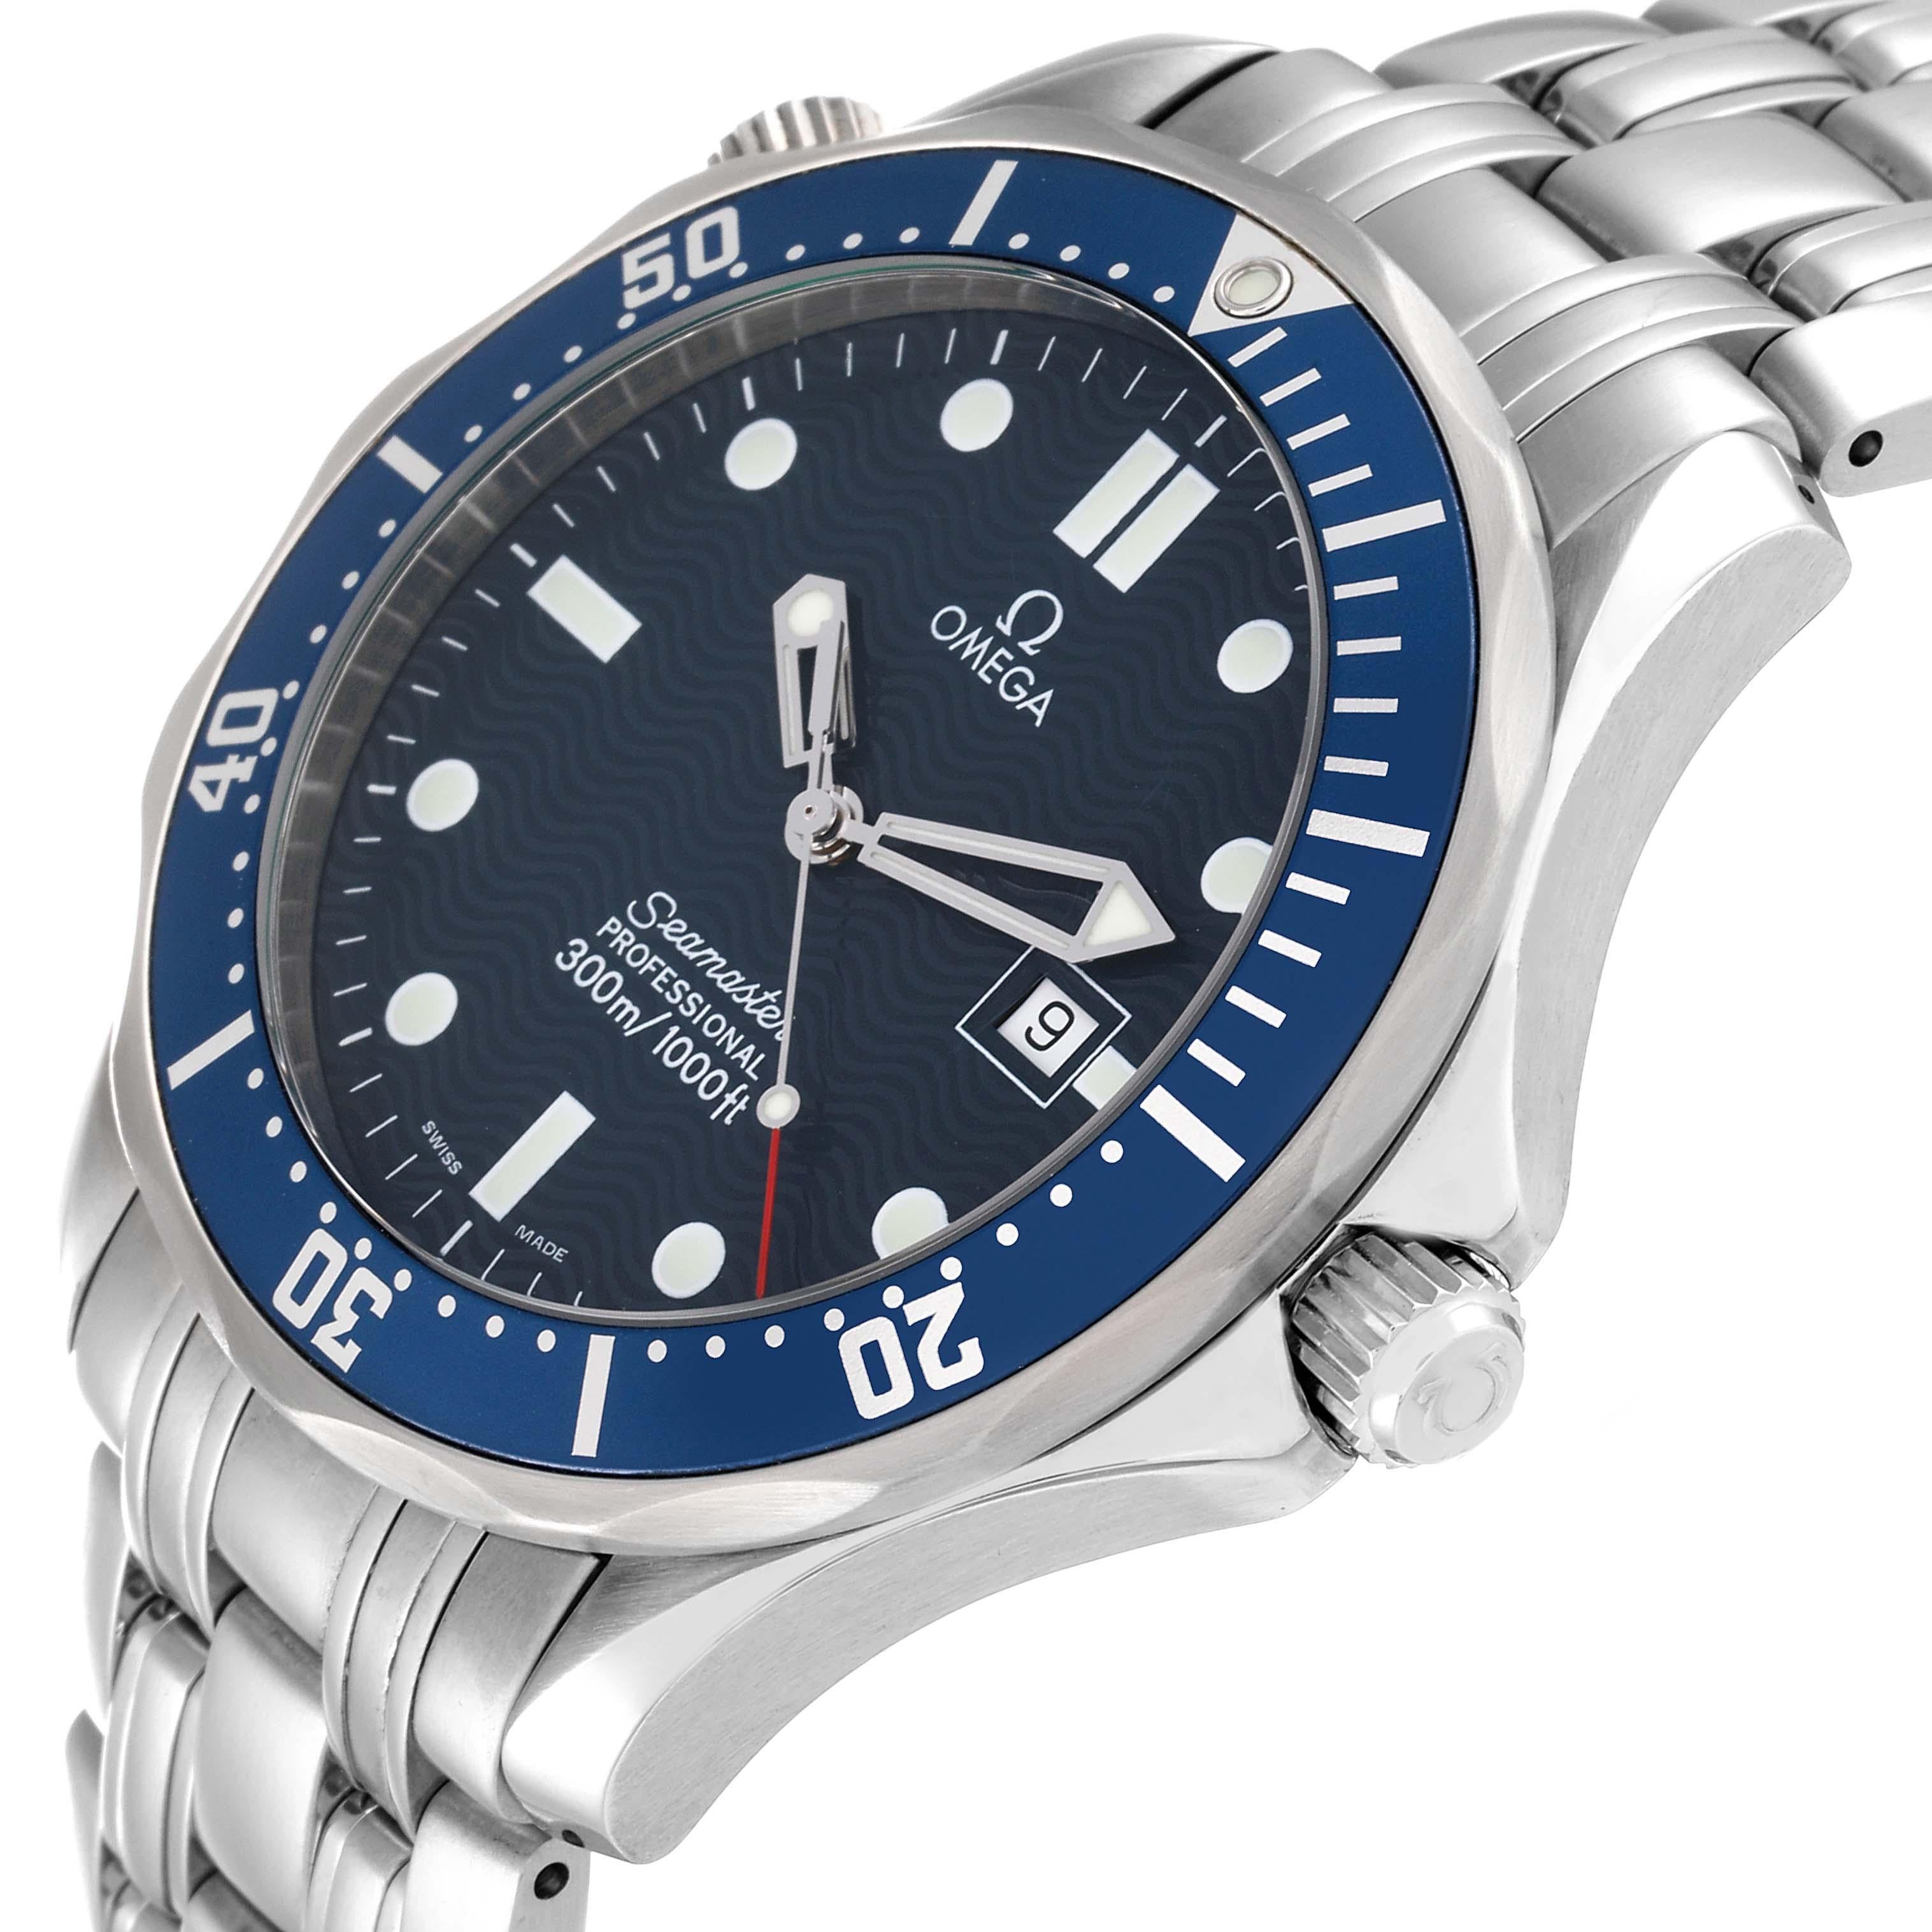 Omega Seamaster Diver James Bond Steel Mens Watch 2541.80.00 Box Papers 1